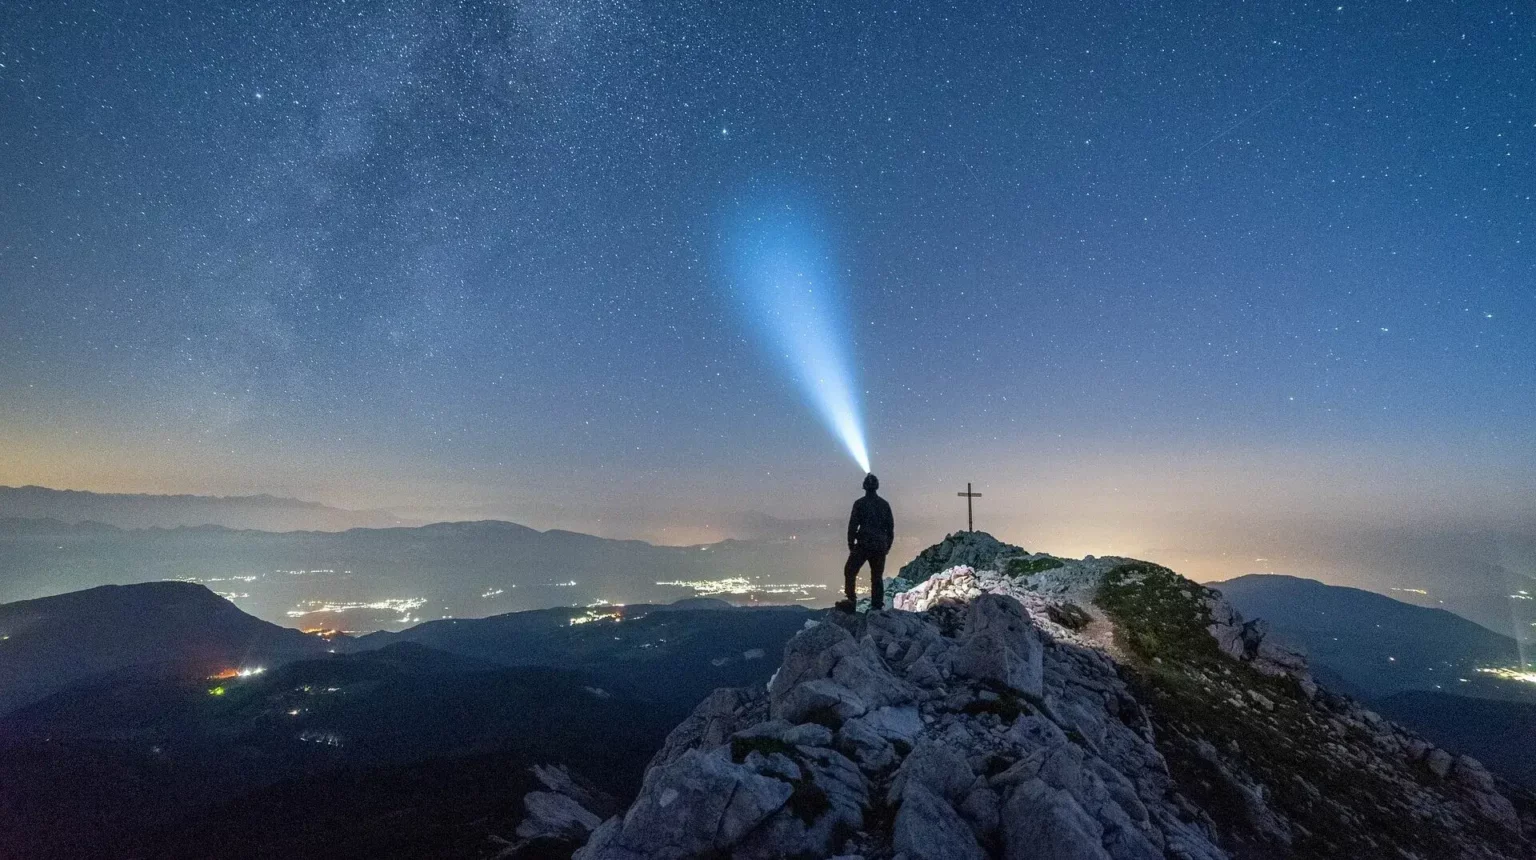 A person with a headlamp at the top of a mountain at night